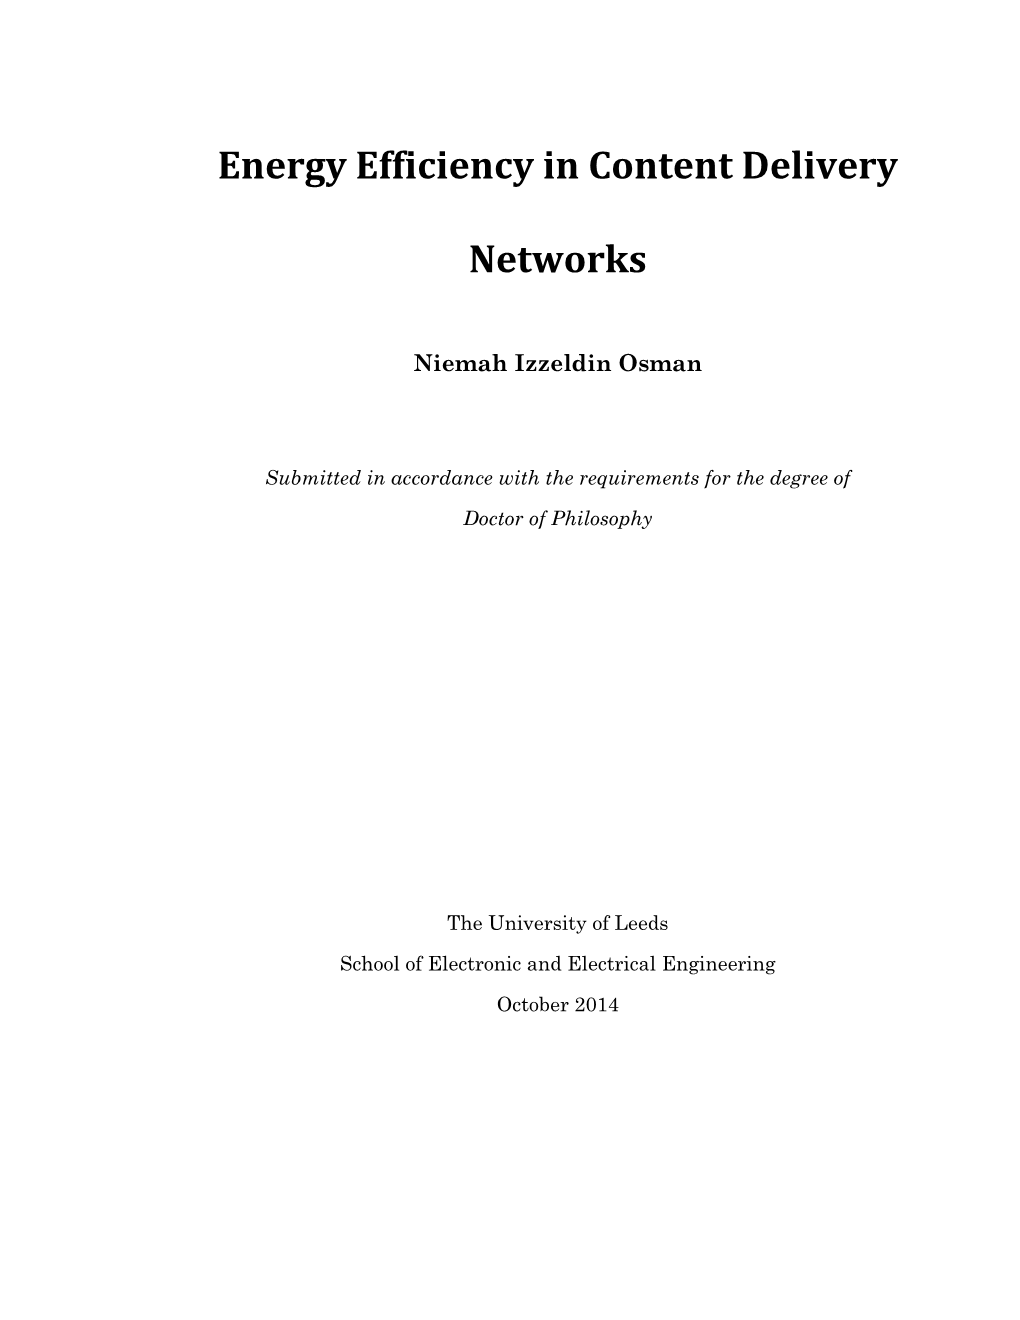 Energy Efficiency in Content Delivery Networks